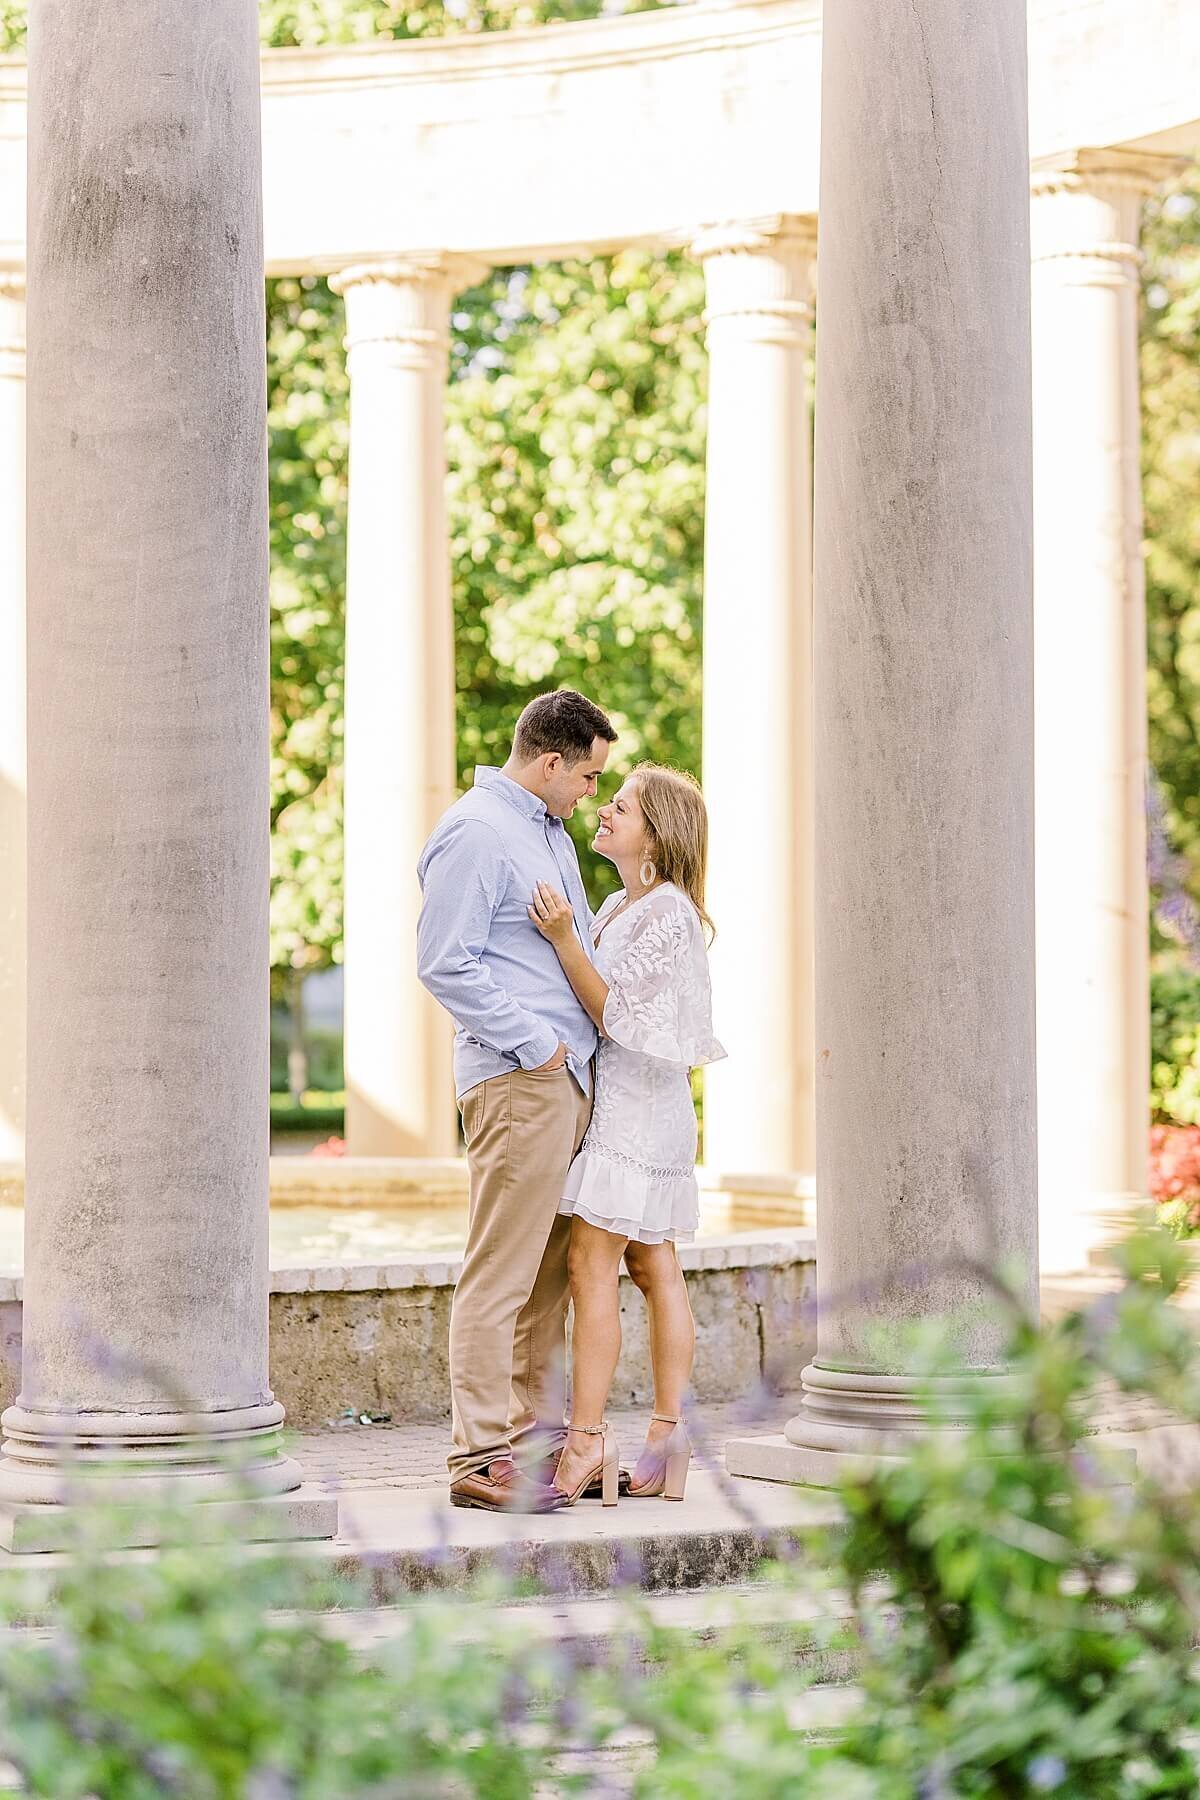 McGovern-Centennial-Gardens-Hermann-Park-Engagement-Session-Alicia-Yarrish-Photography_0035